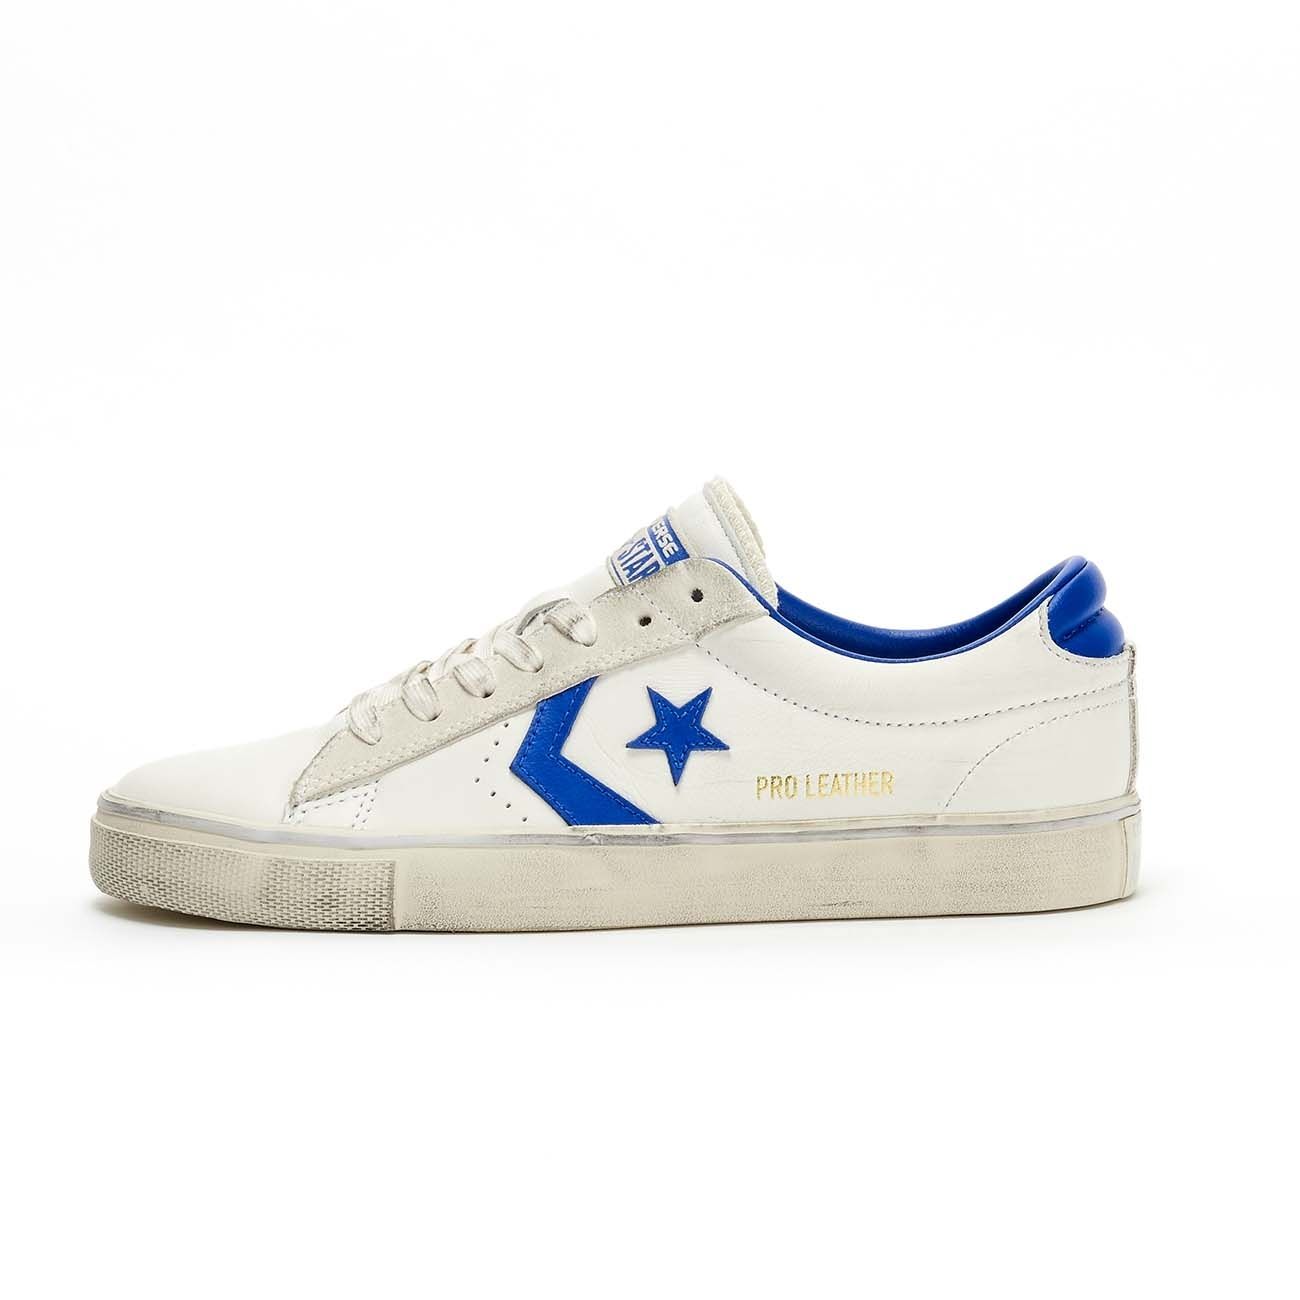 CONVERSE SNEAKERS PRO LEATHER VULC DISTRESSED OX Men White hyper ... شامبو بانتين اكثر كثافه